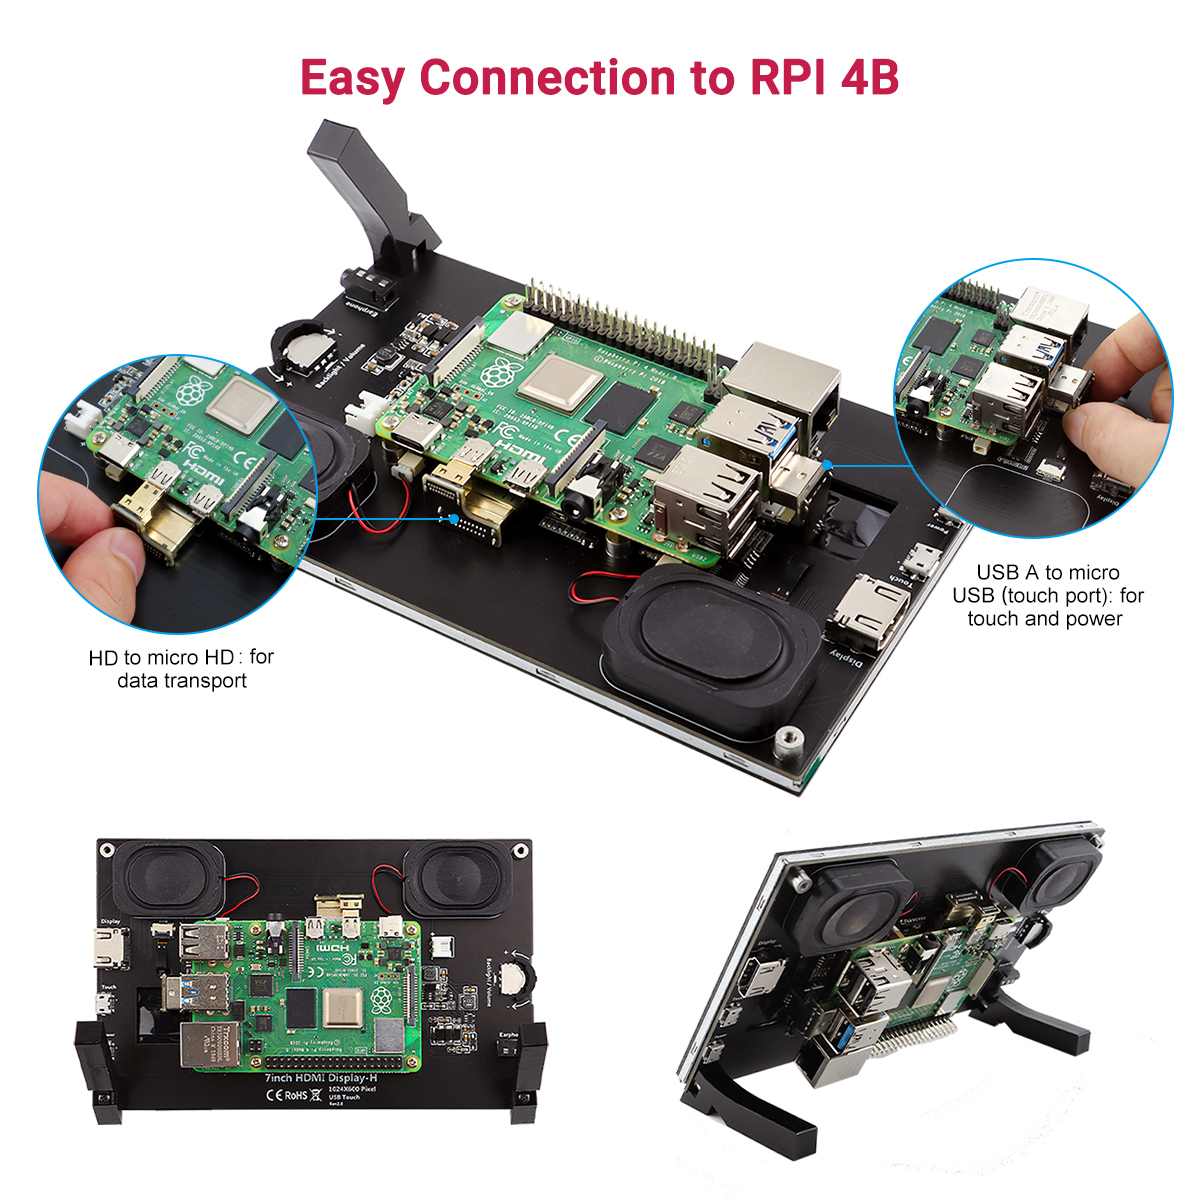 easy connection to RPI 4B